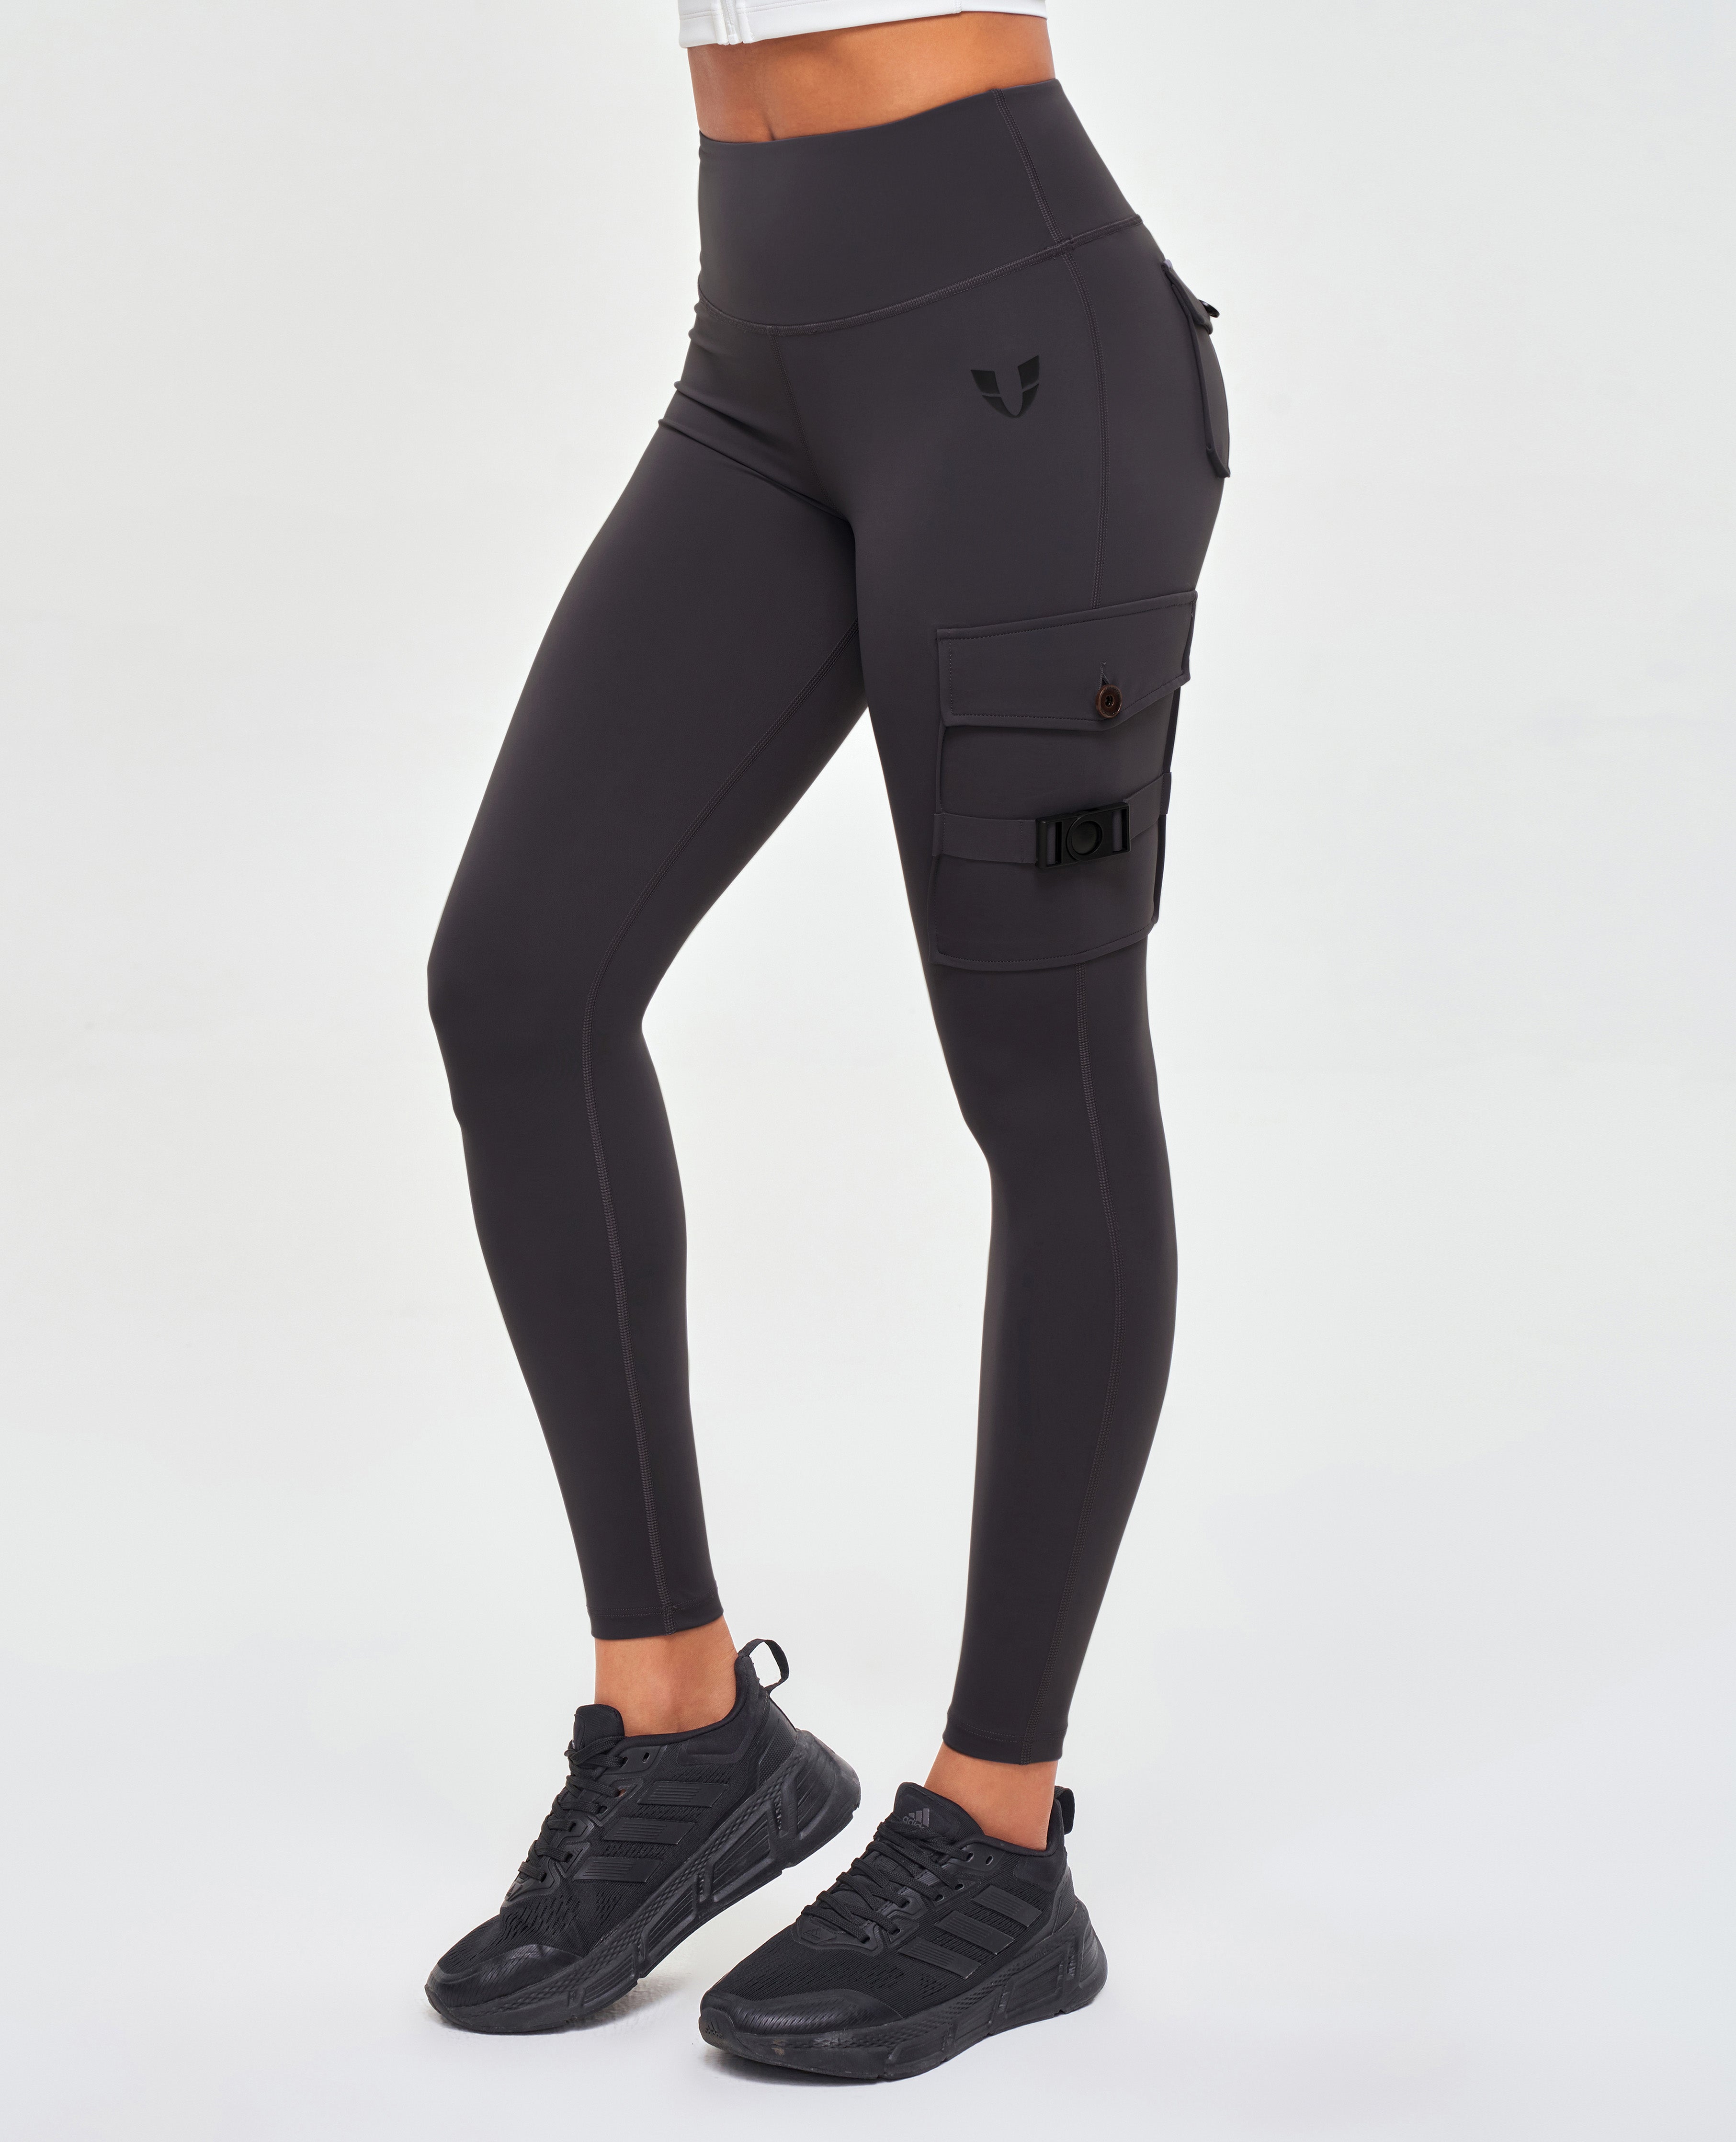 Gym Leggings with Pockets Black, Activewear